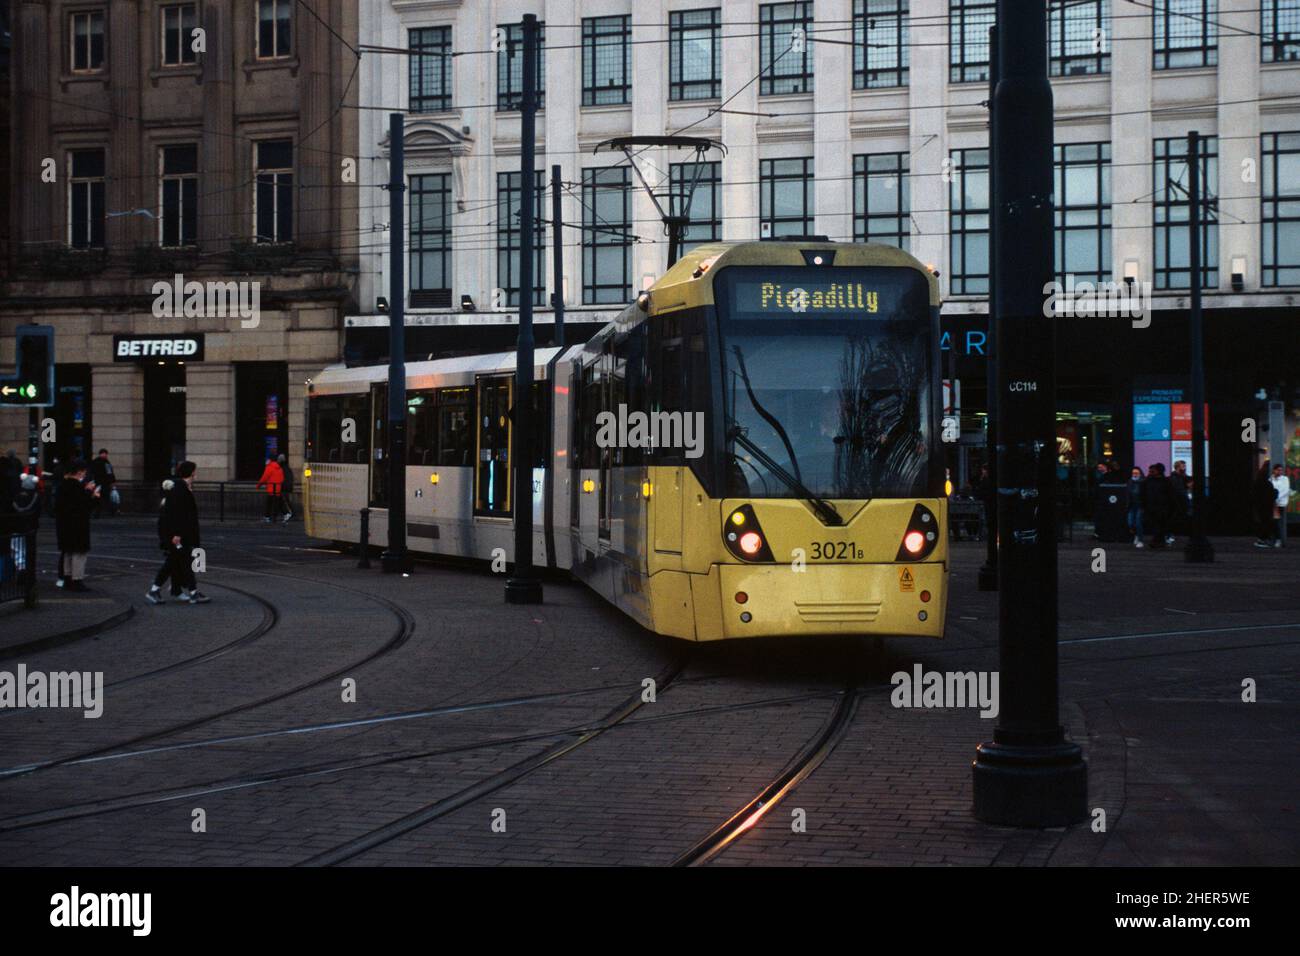 Manchester, UK - December 2021: A Metrolink tram (Bombardier M5000, no. 3021) through the junction near Piccadilly Gardens. Stock Photo